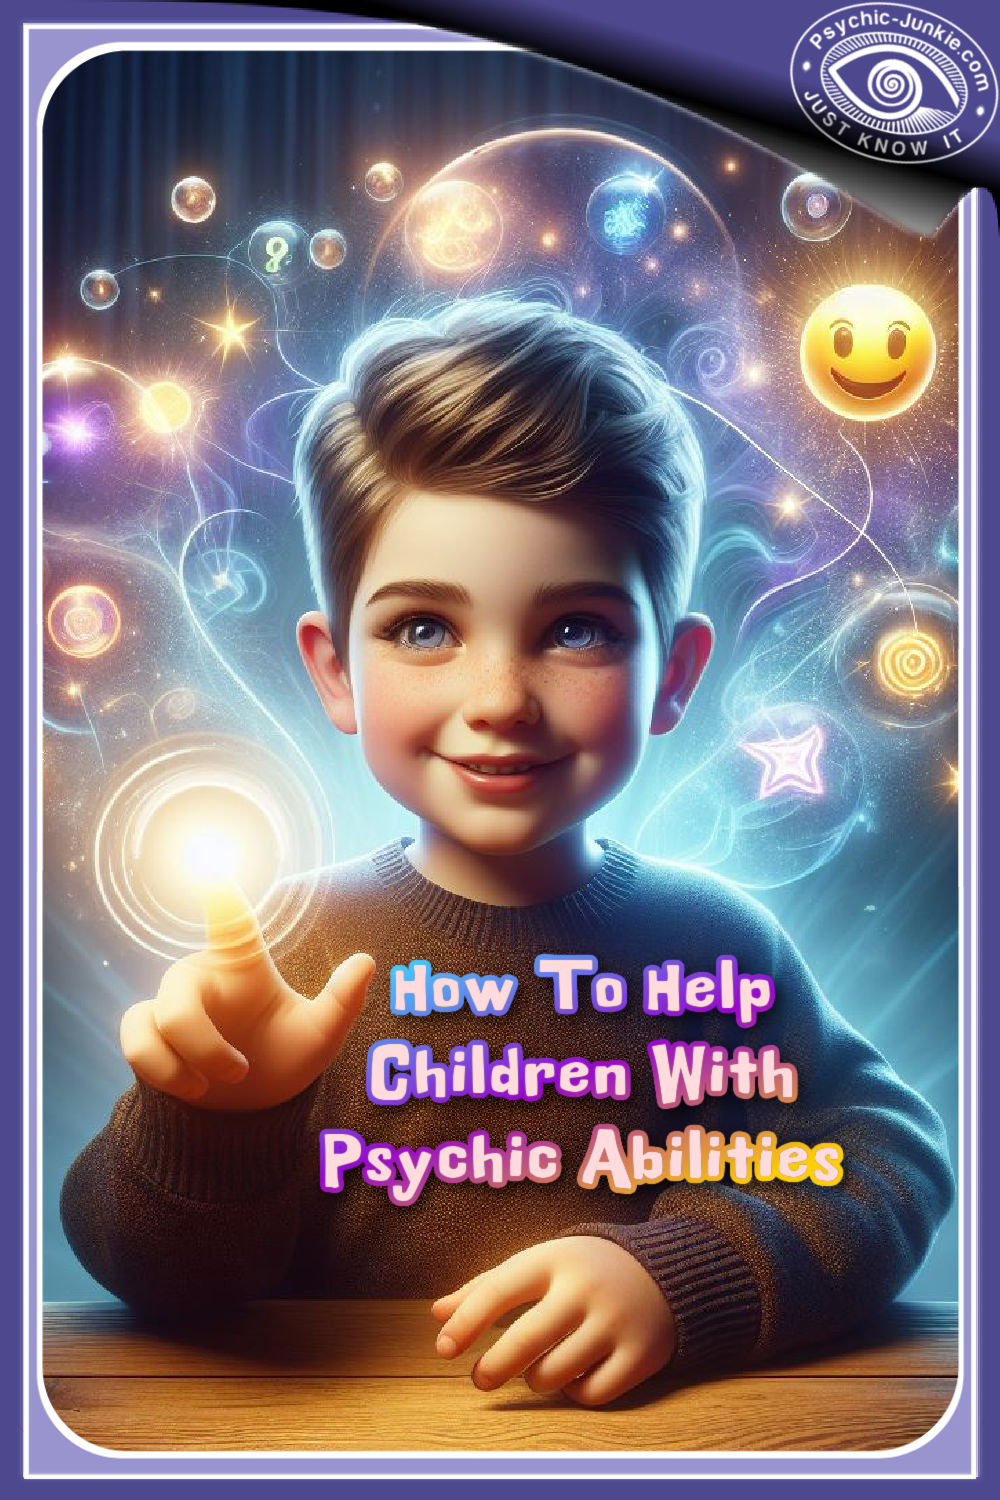 How To Help Children With Psychic Abilities